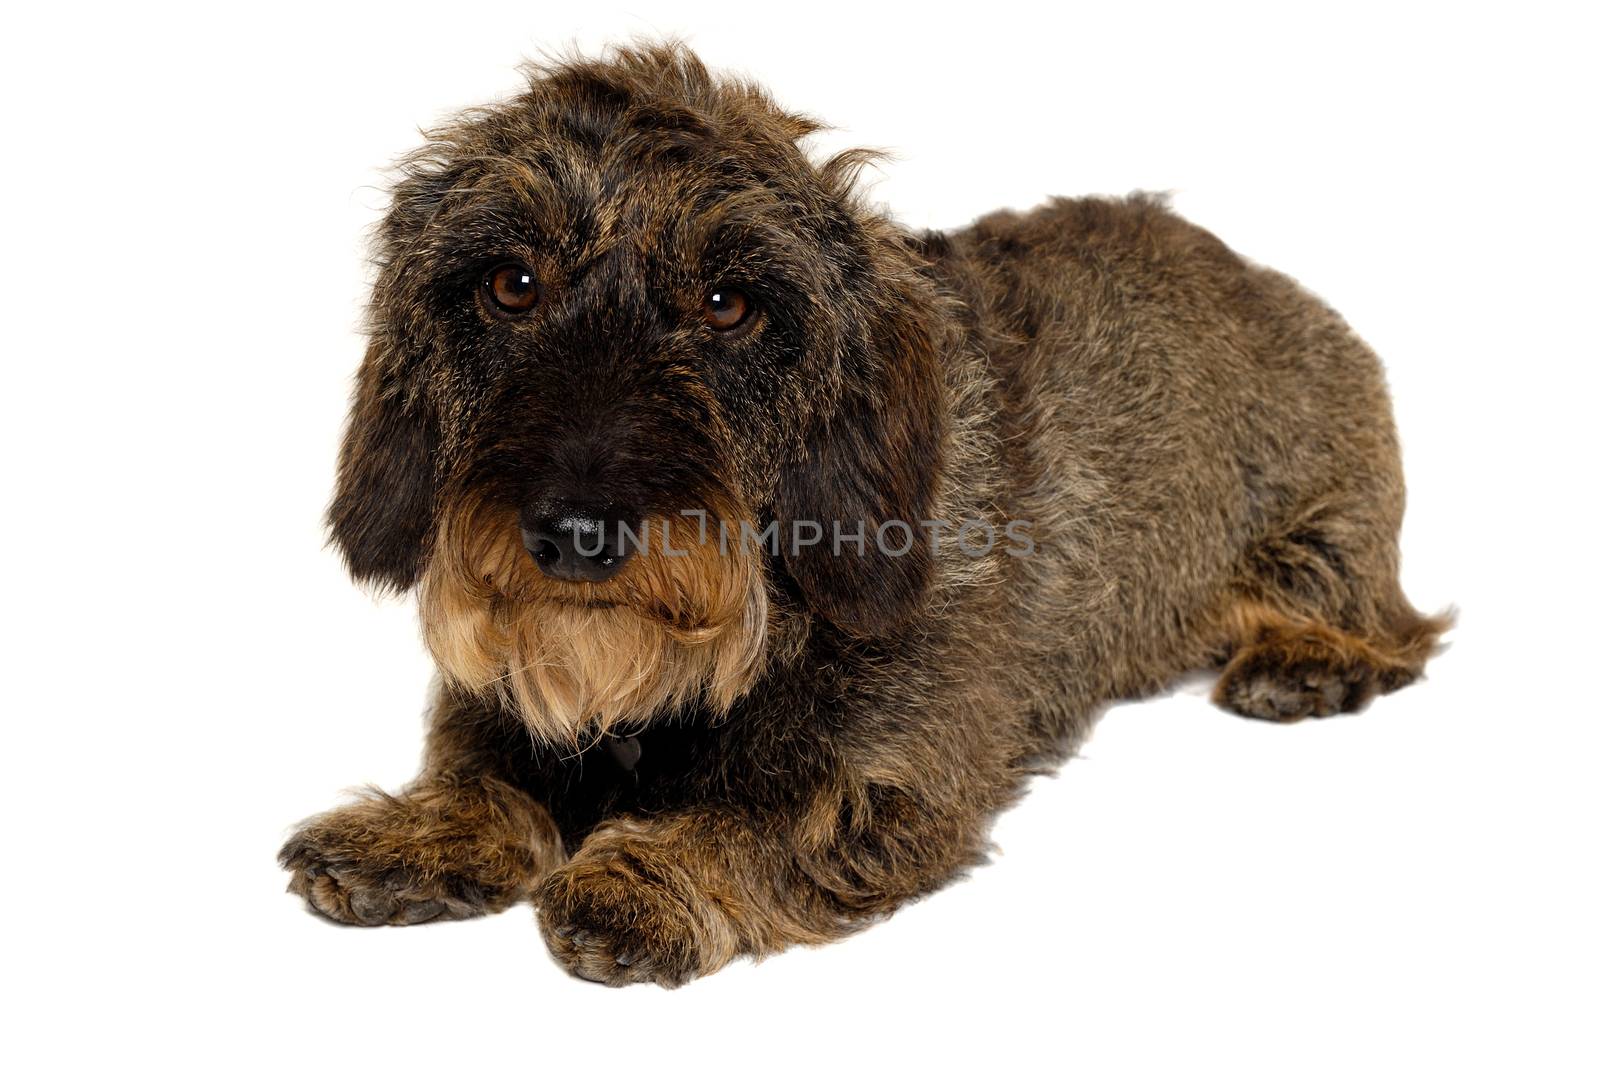 Dachshund dog isolated on a clean white background